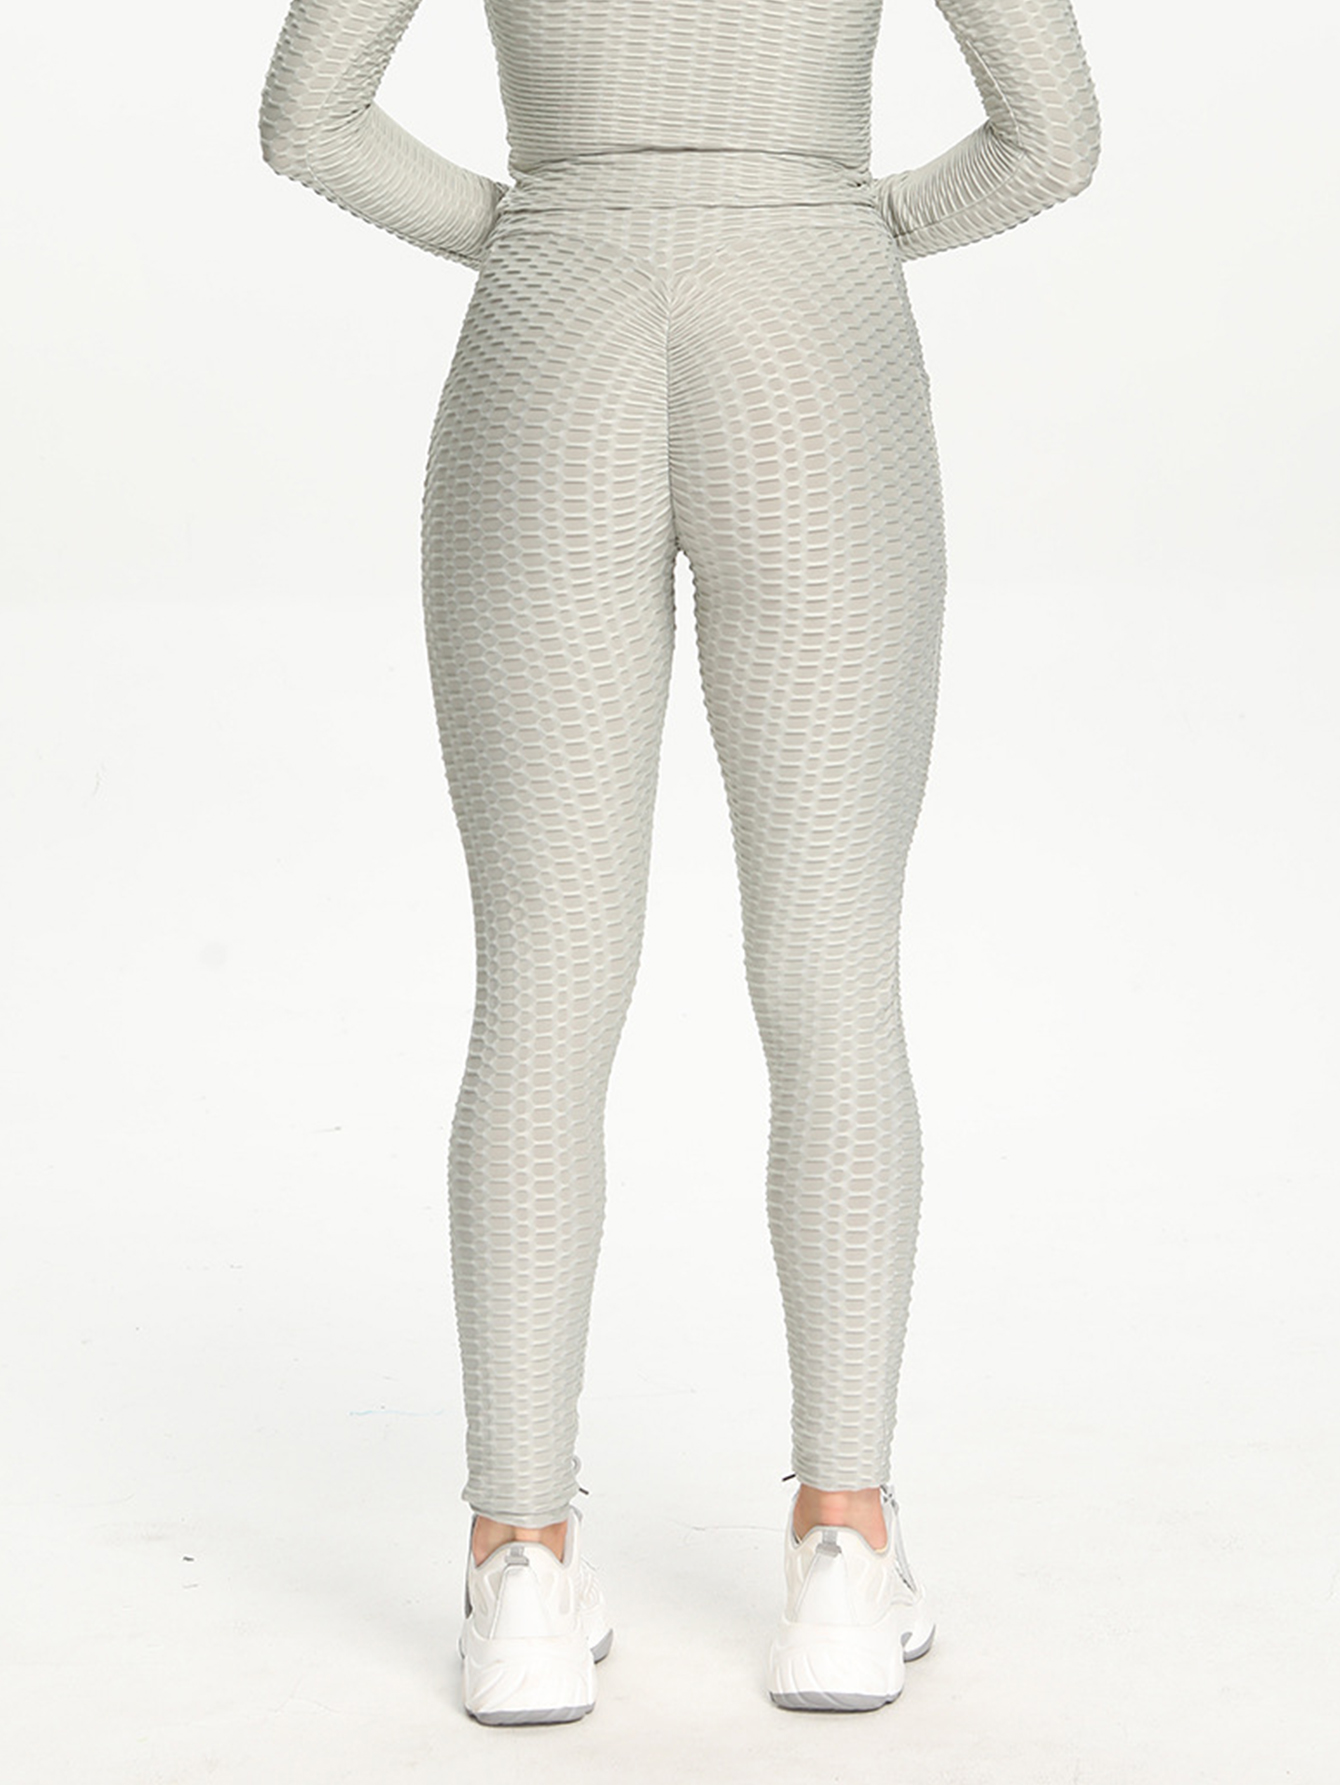 Solid High Waist Honeycomb Sports Pants, High Stretchy Side Pocket